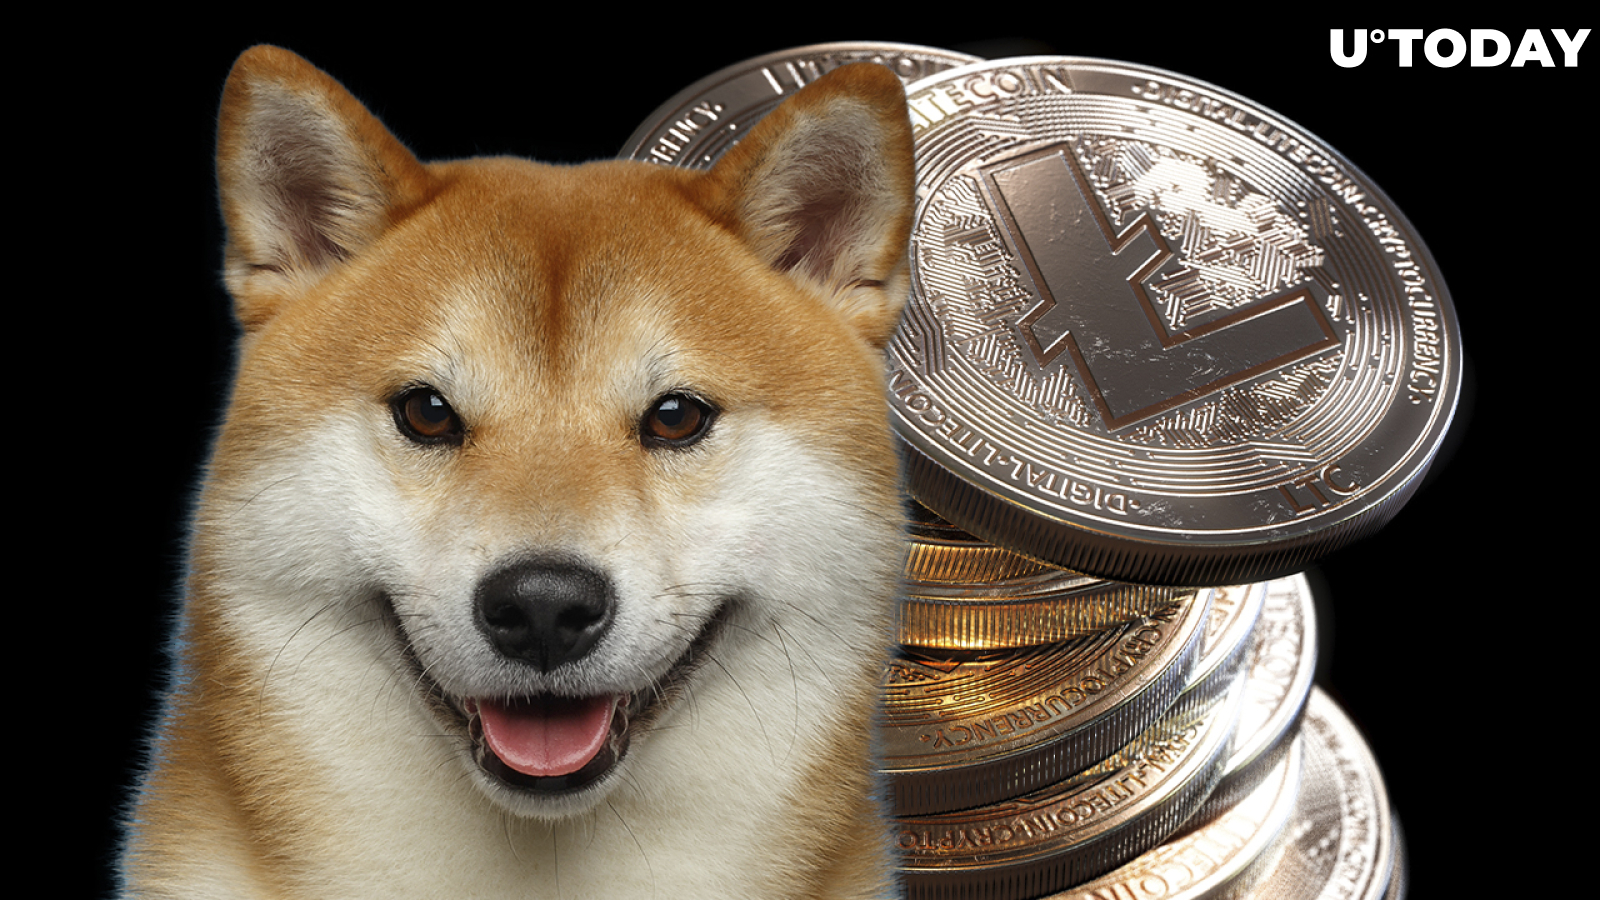 Litecoin Founder Adds Shiba Dog to His Twitter Background Image, Praising Dogecoin